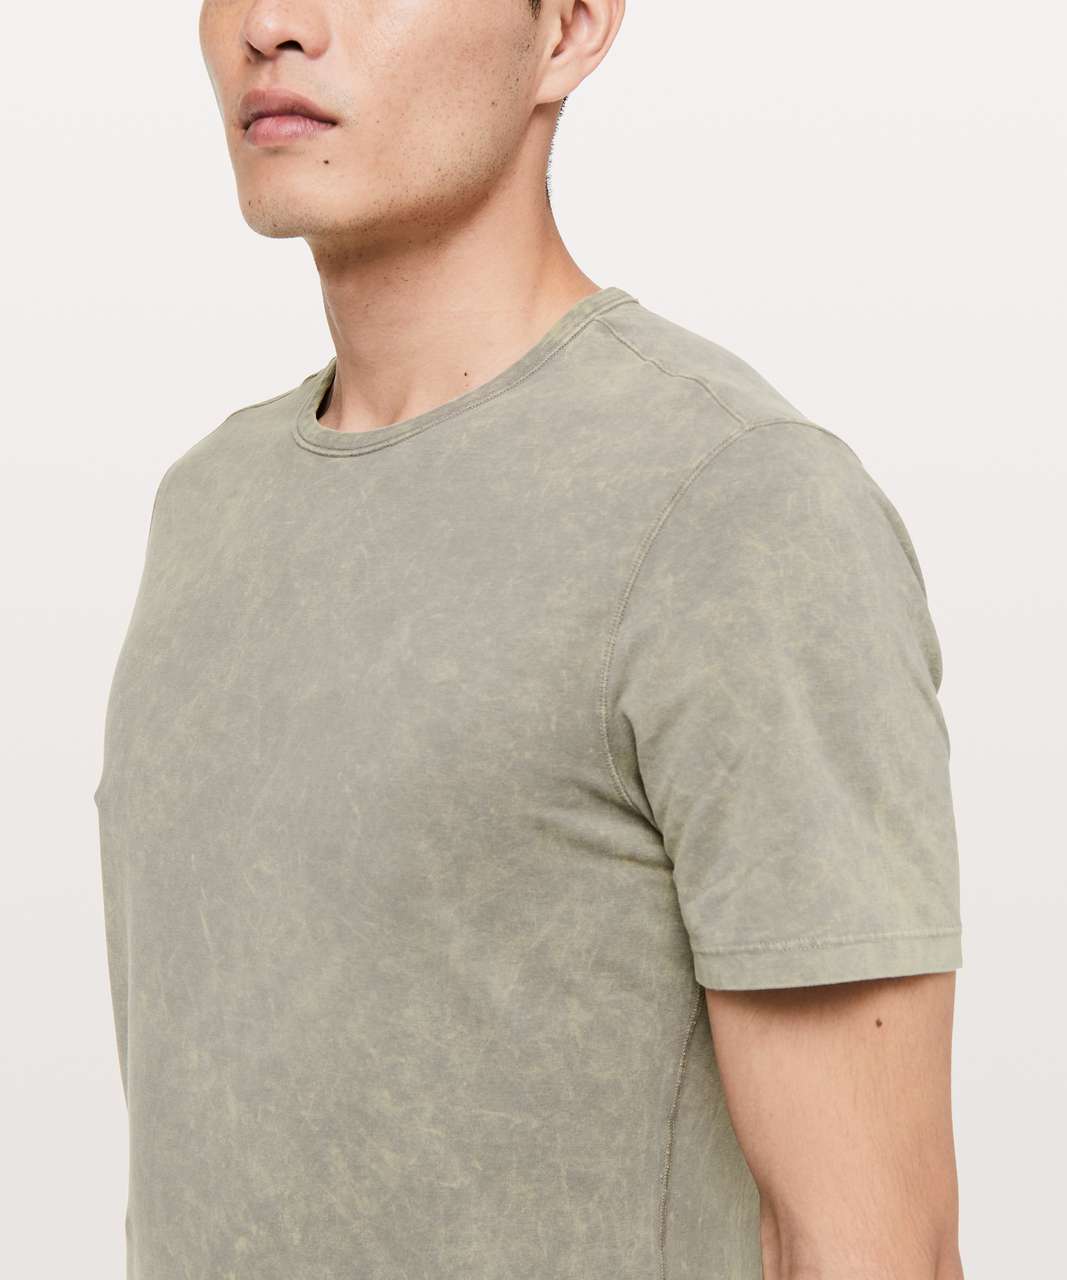 Lululemon 5 Year Basic Tee *Updated Fit - Mineral Washed Carbon Dust